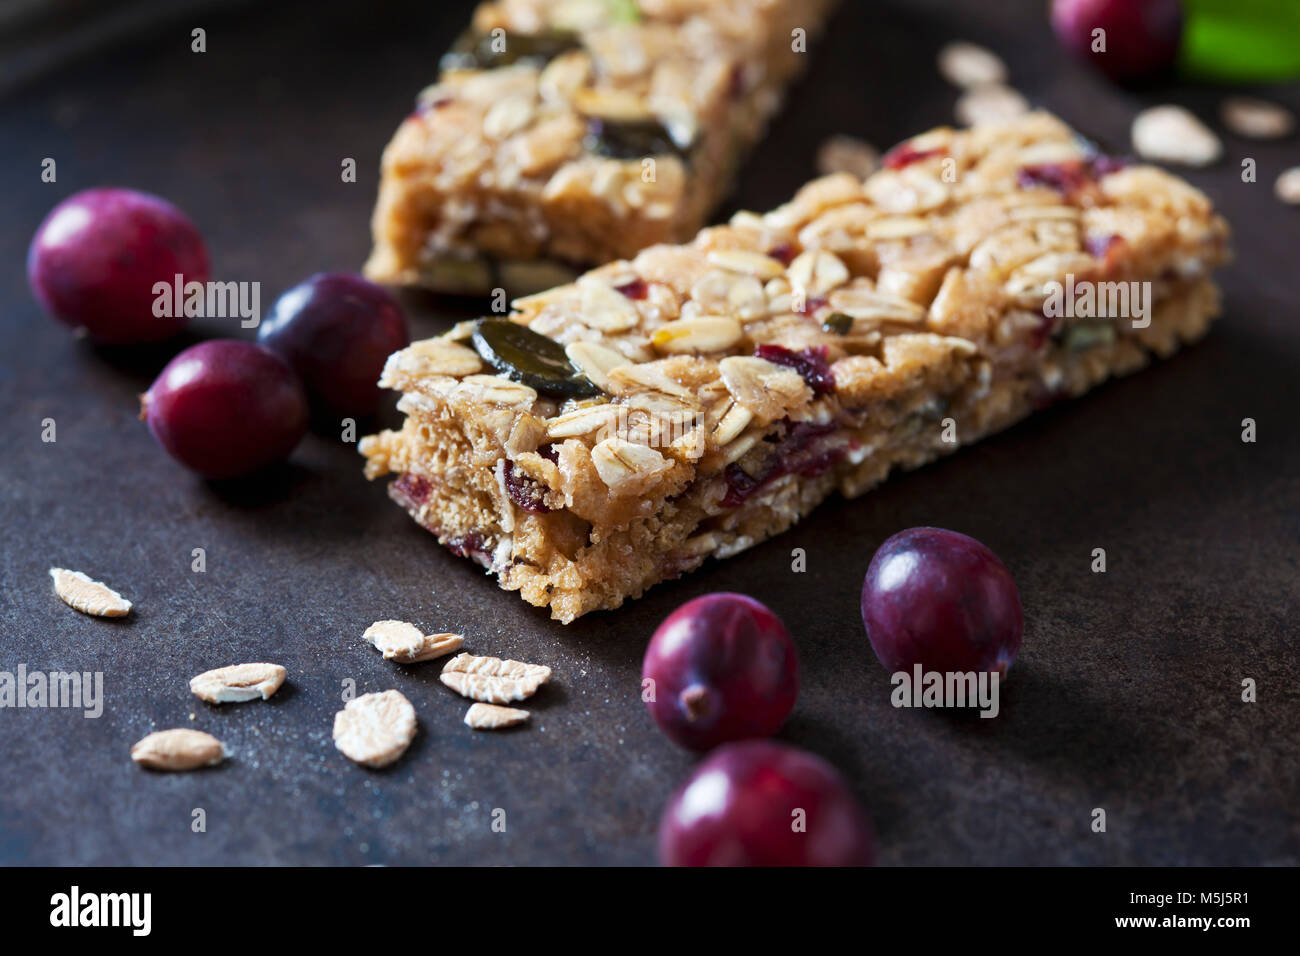 Muesli bars with cranberries and oat flakes on dark background Stock Photo